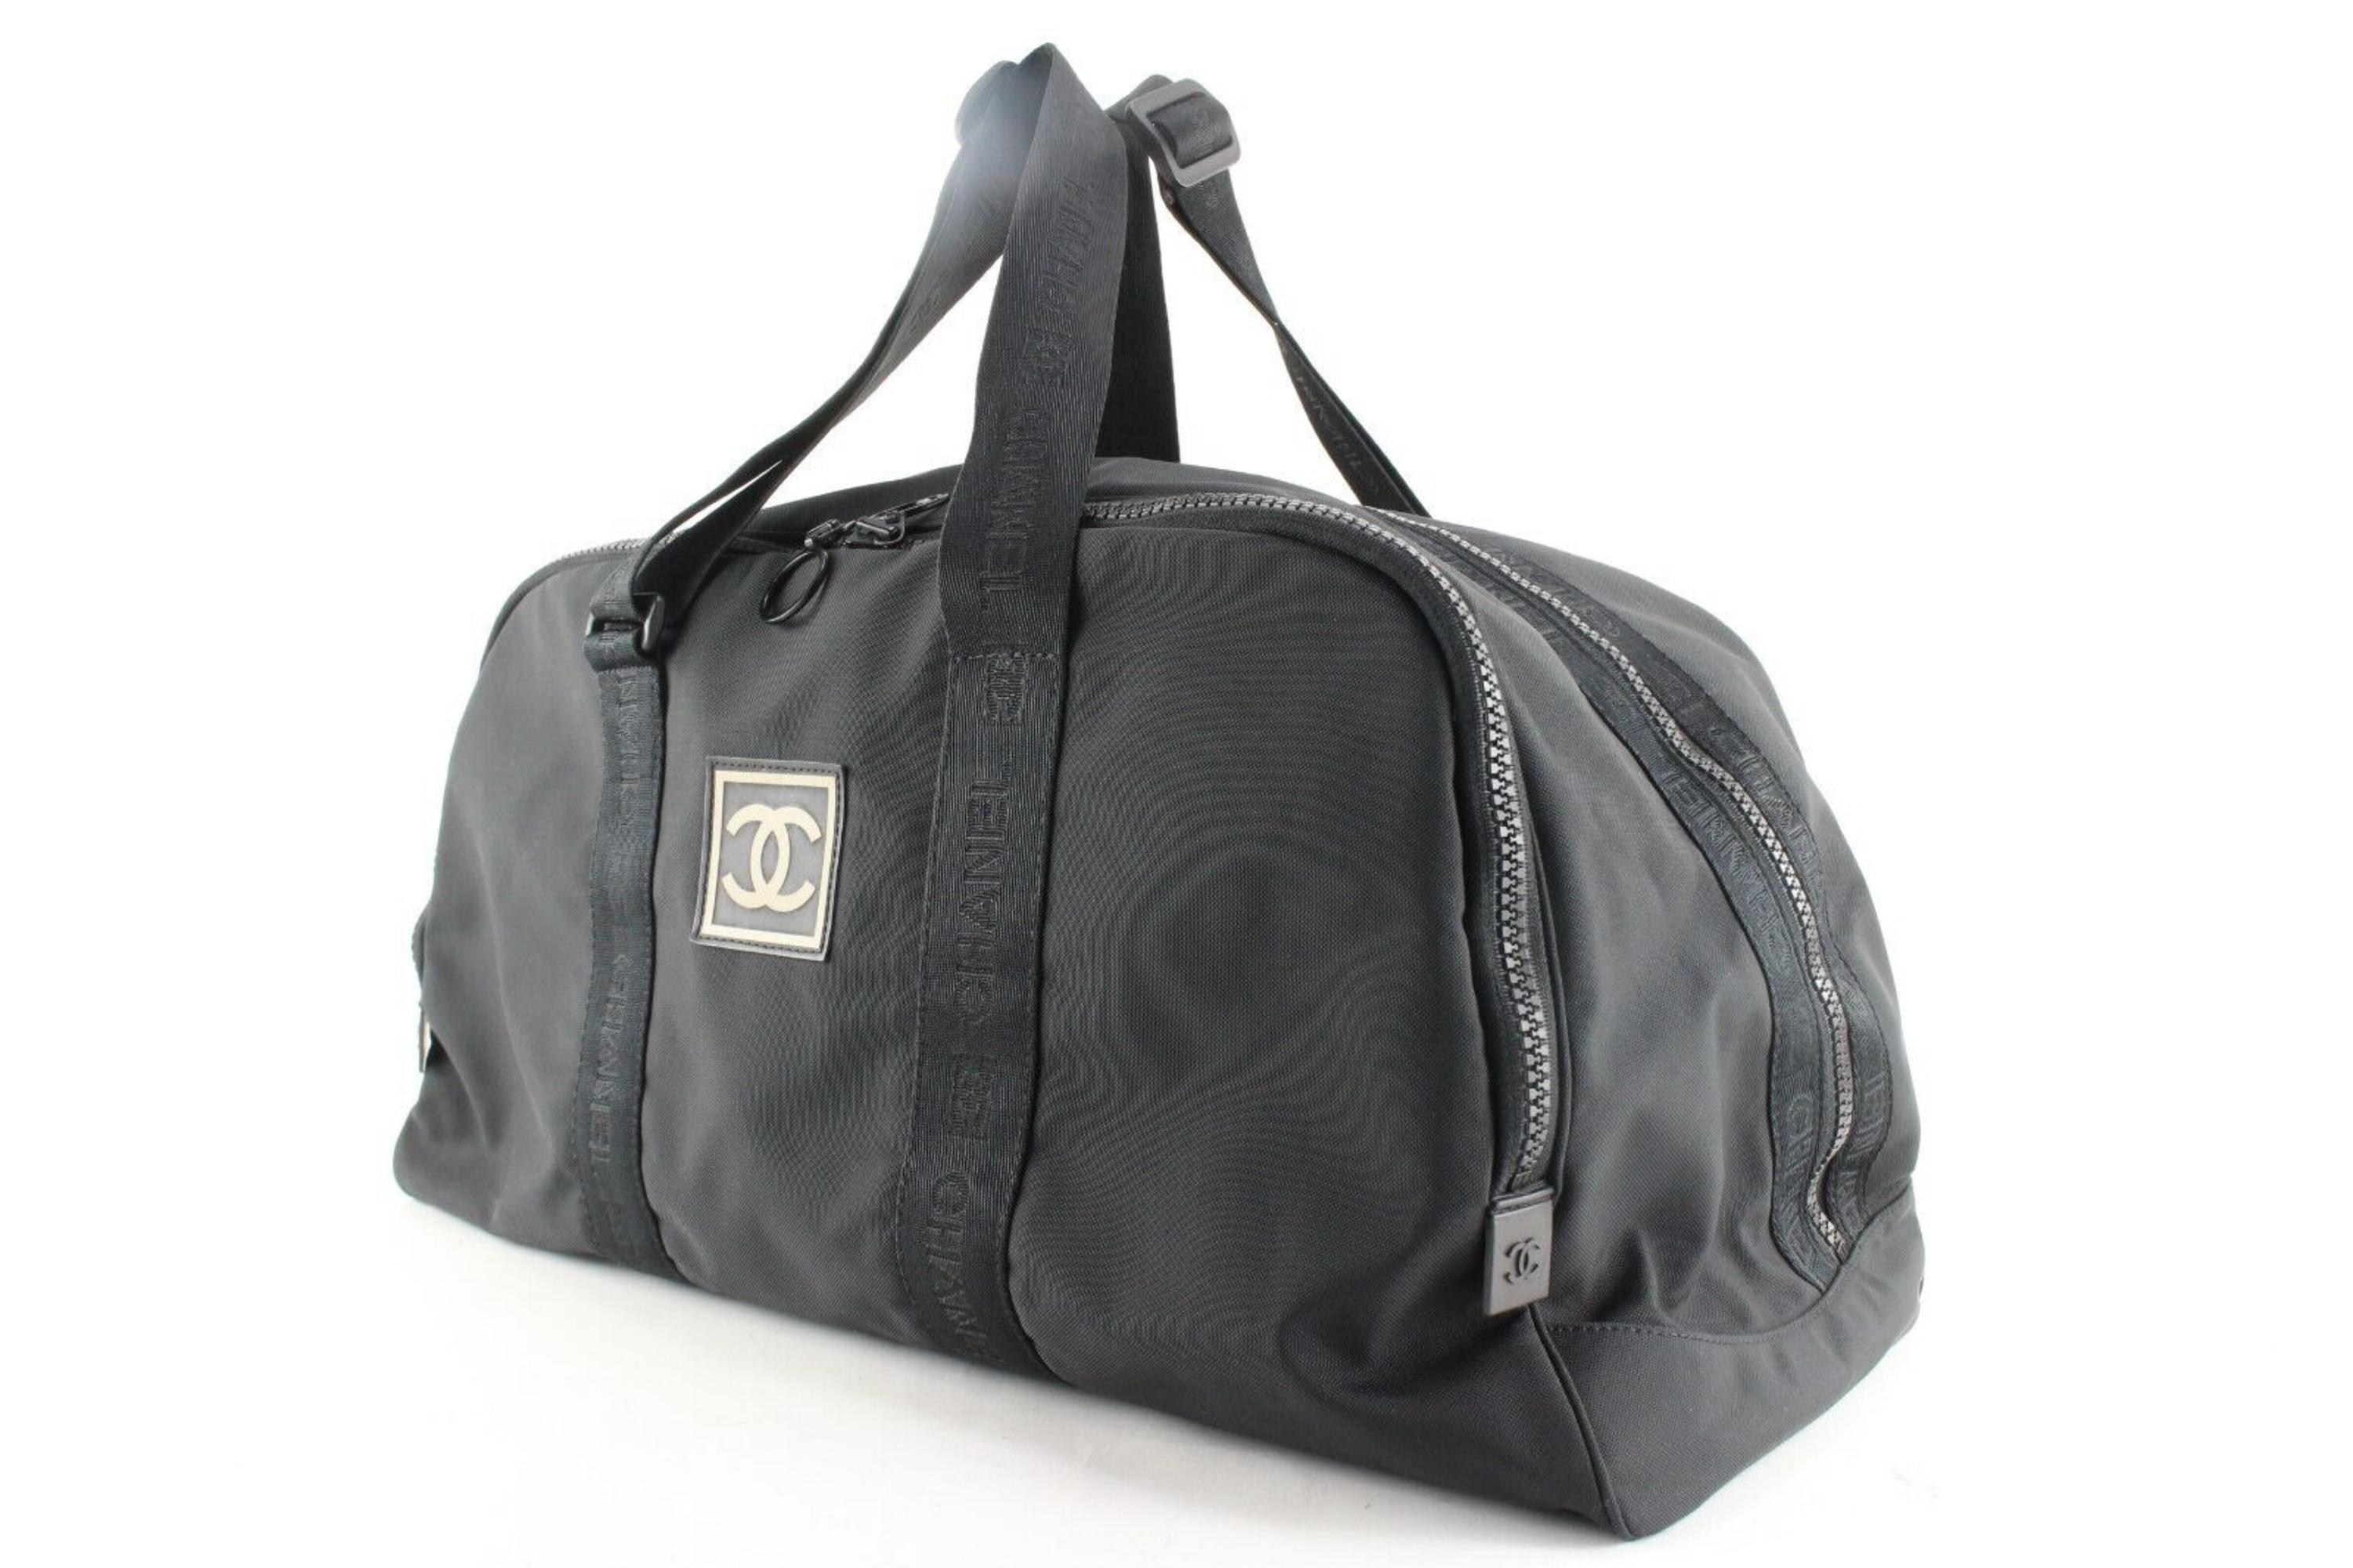 Chanel Black CC Sports Duffle Unisex Men's Gym 1CAS0419
Date Code/Serial Number: 7839632

Made In: Italy

Measurements: Length:  22